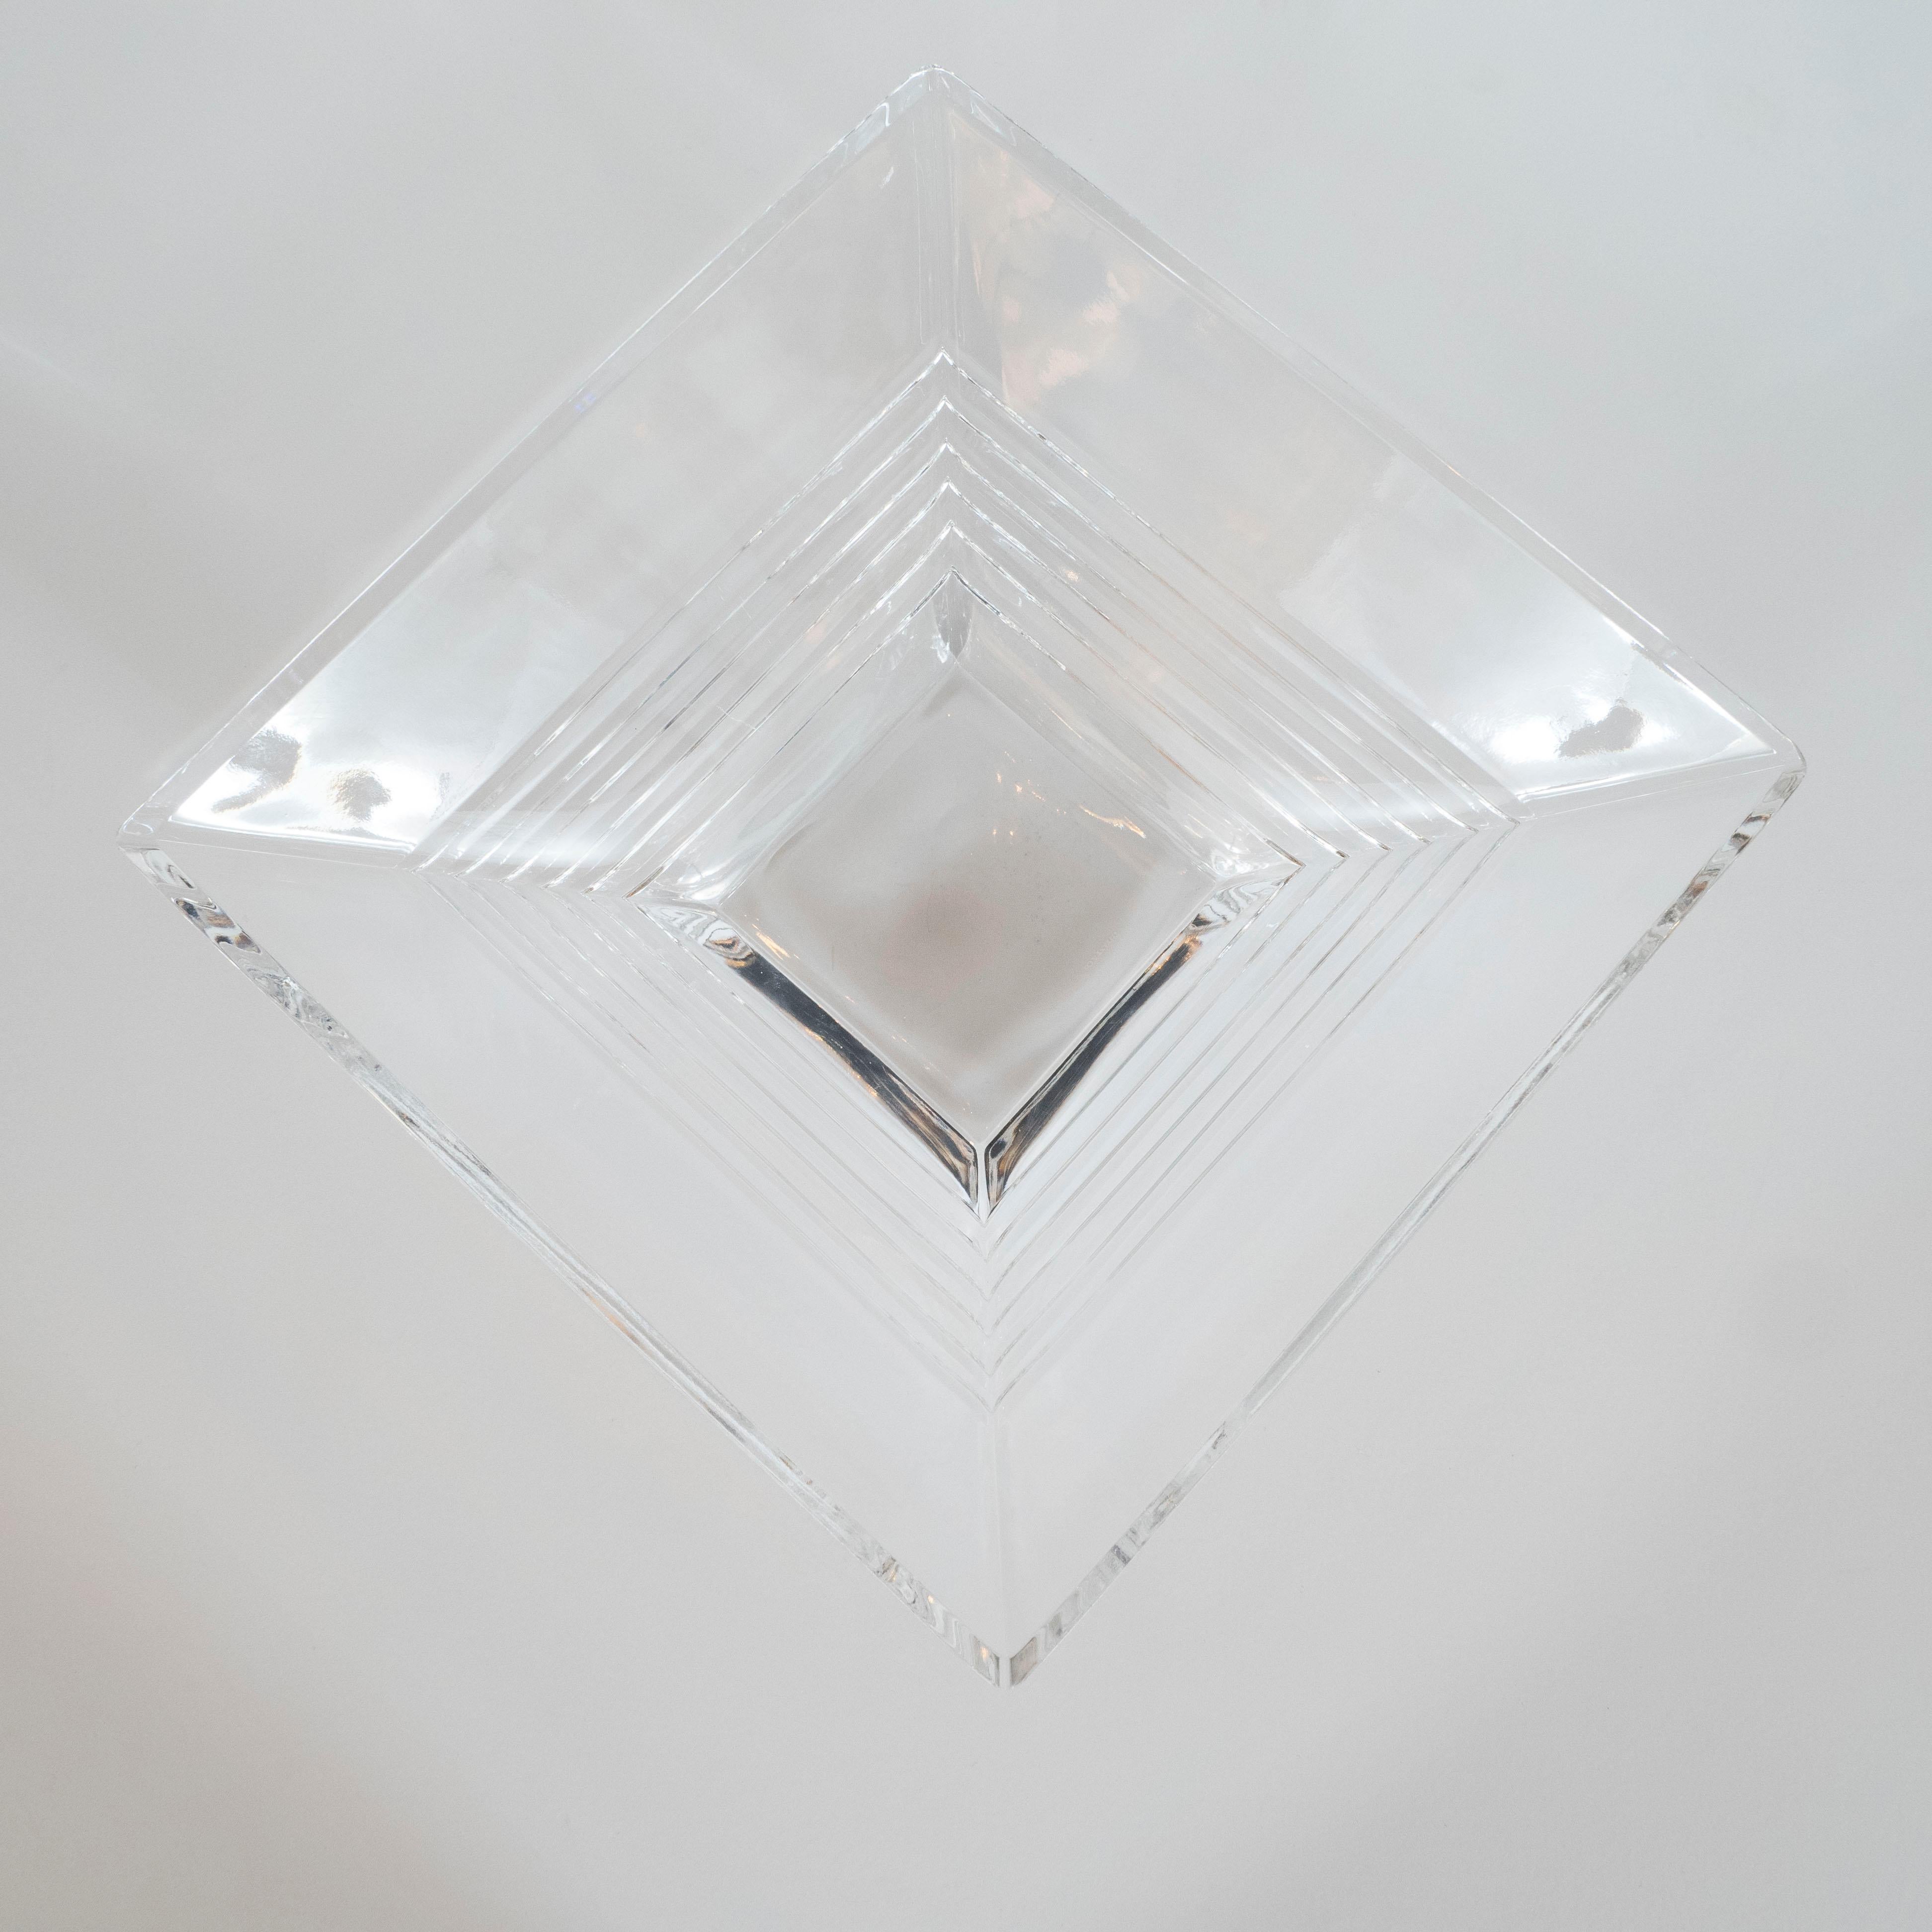 Late 20th Century Art Deco Style Stepped Translucent Crystal Decorative Bowl by Tiffany & Co.